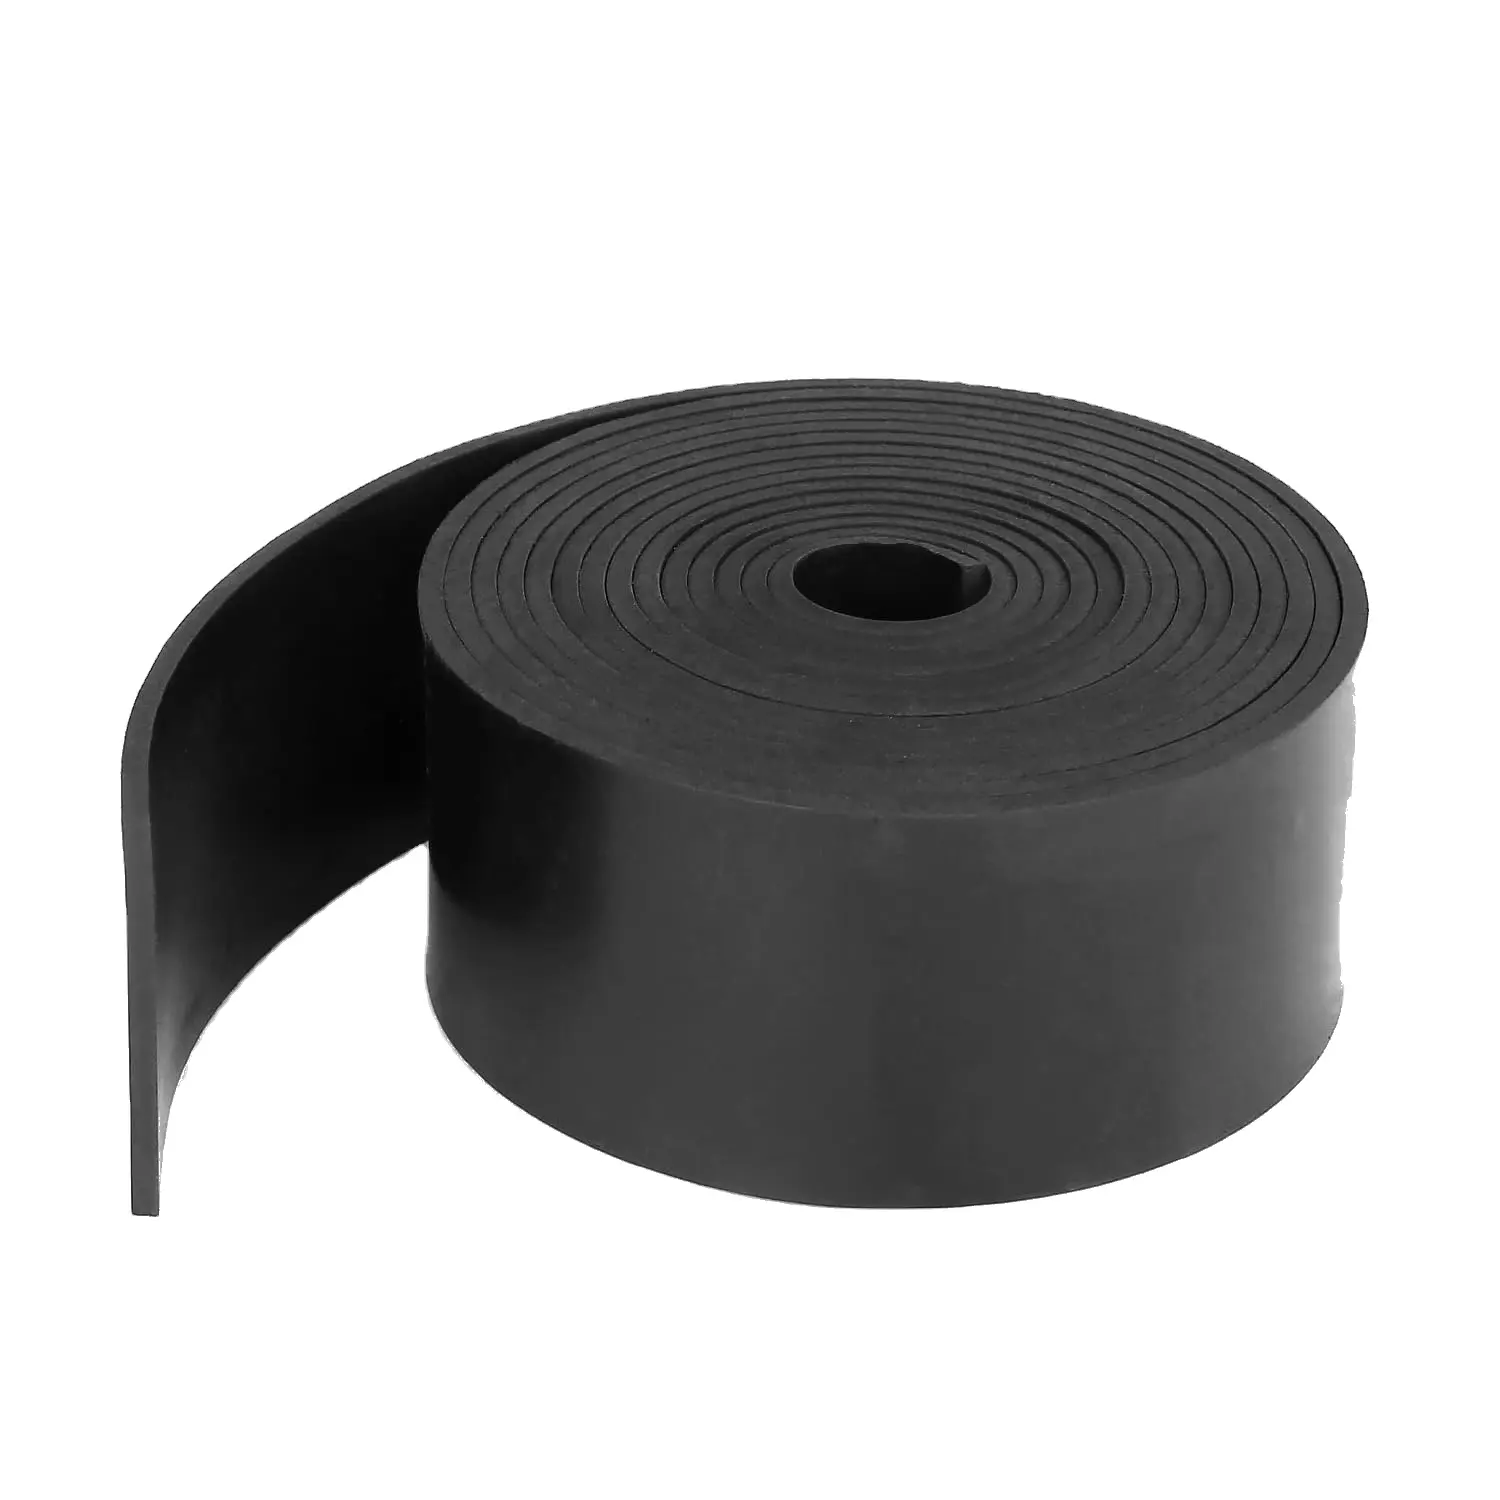 Thin Solid Neoprene Rubber Strips 1/16 (.062)" Thick X 2" Wide X 110" Long, Rubber Sheets, Rolls, Strips Gaskets, Sealing